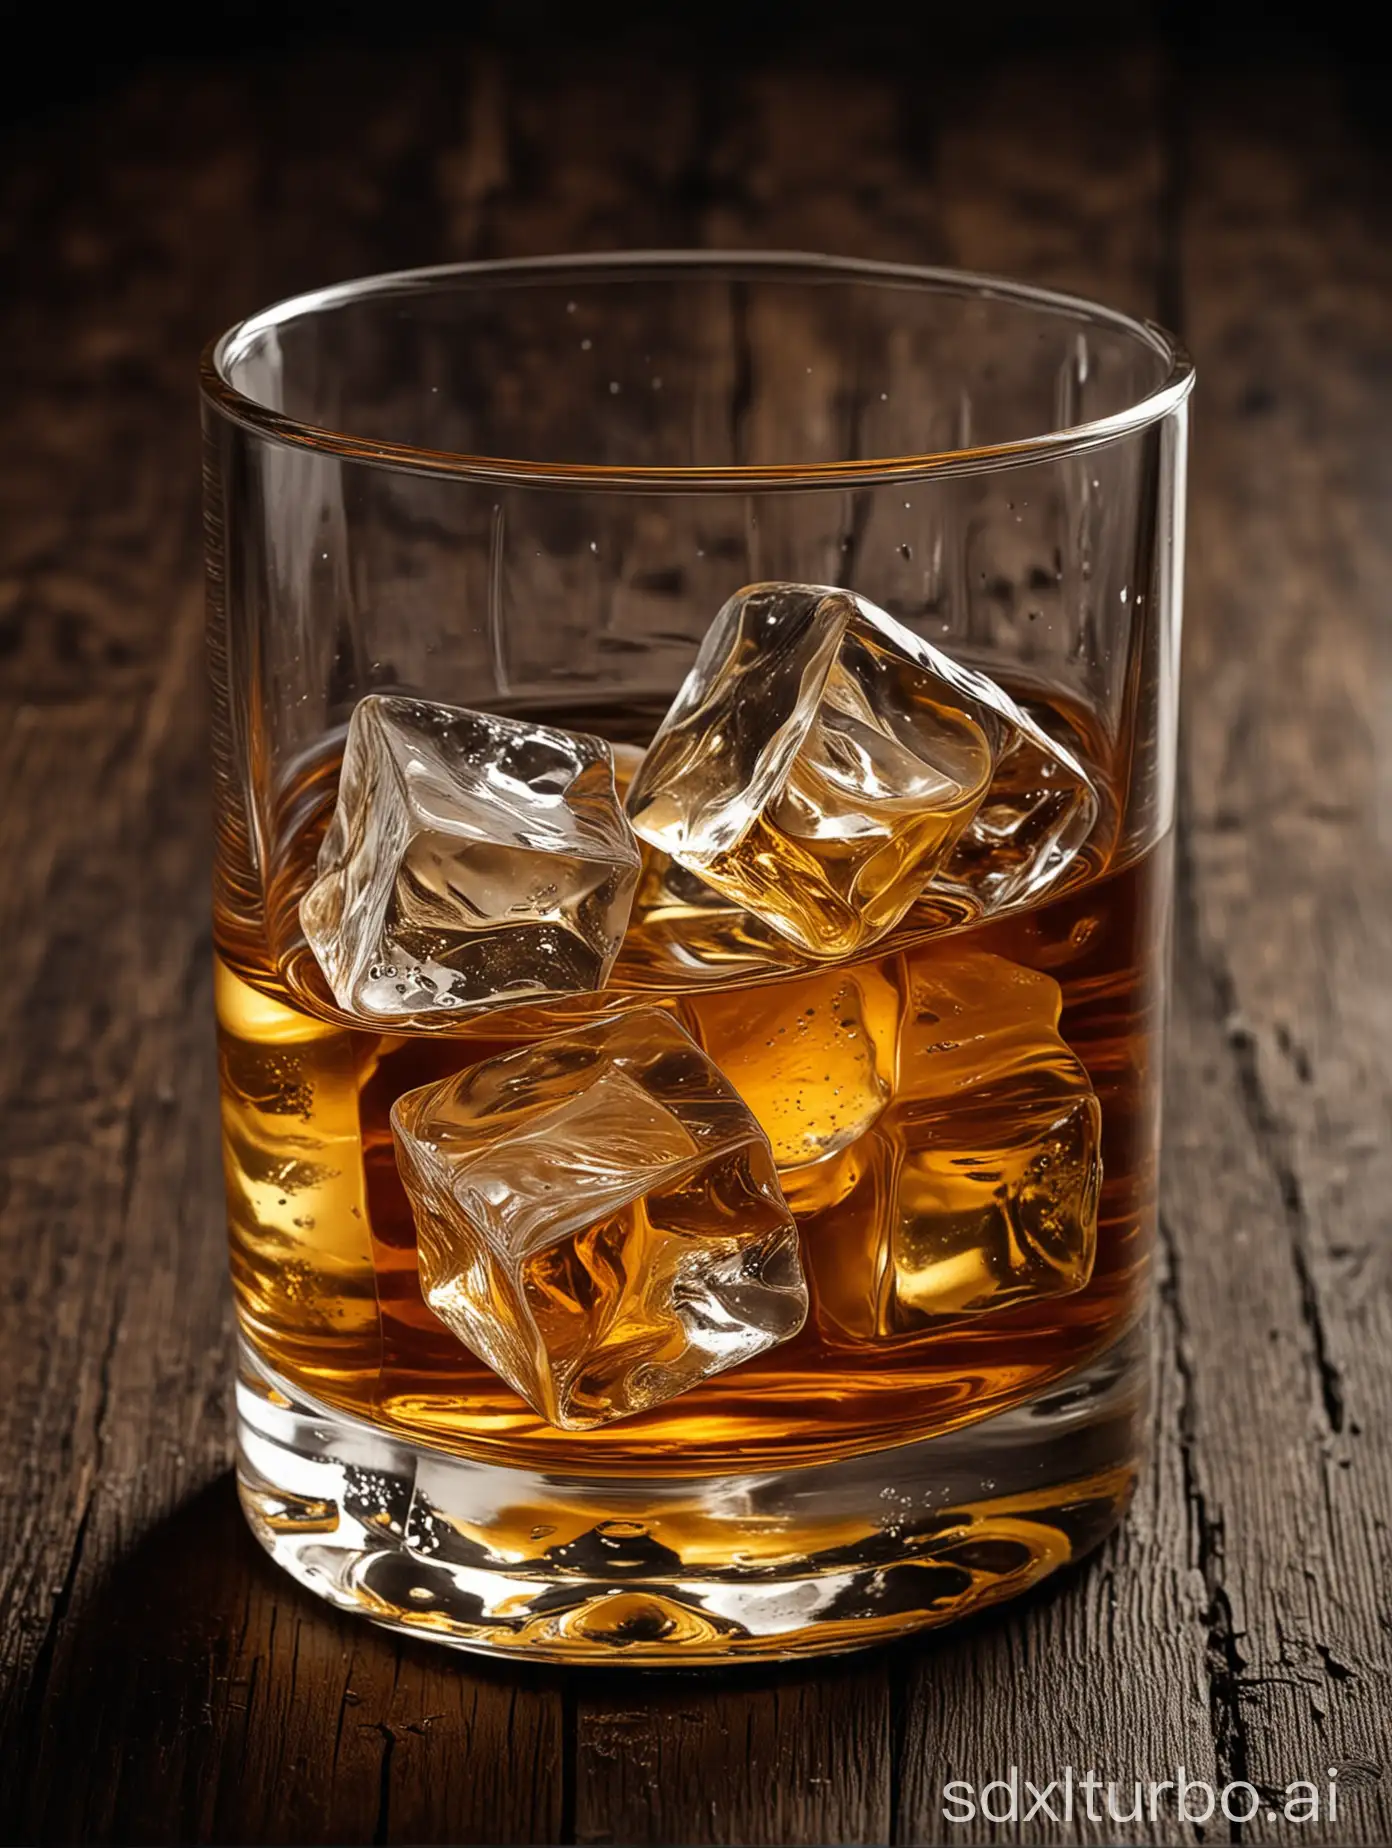 a clear whisky glass with whisky and ice cubes, on an old dark wooden table, dark background, very detailed, ultra-high resolution